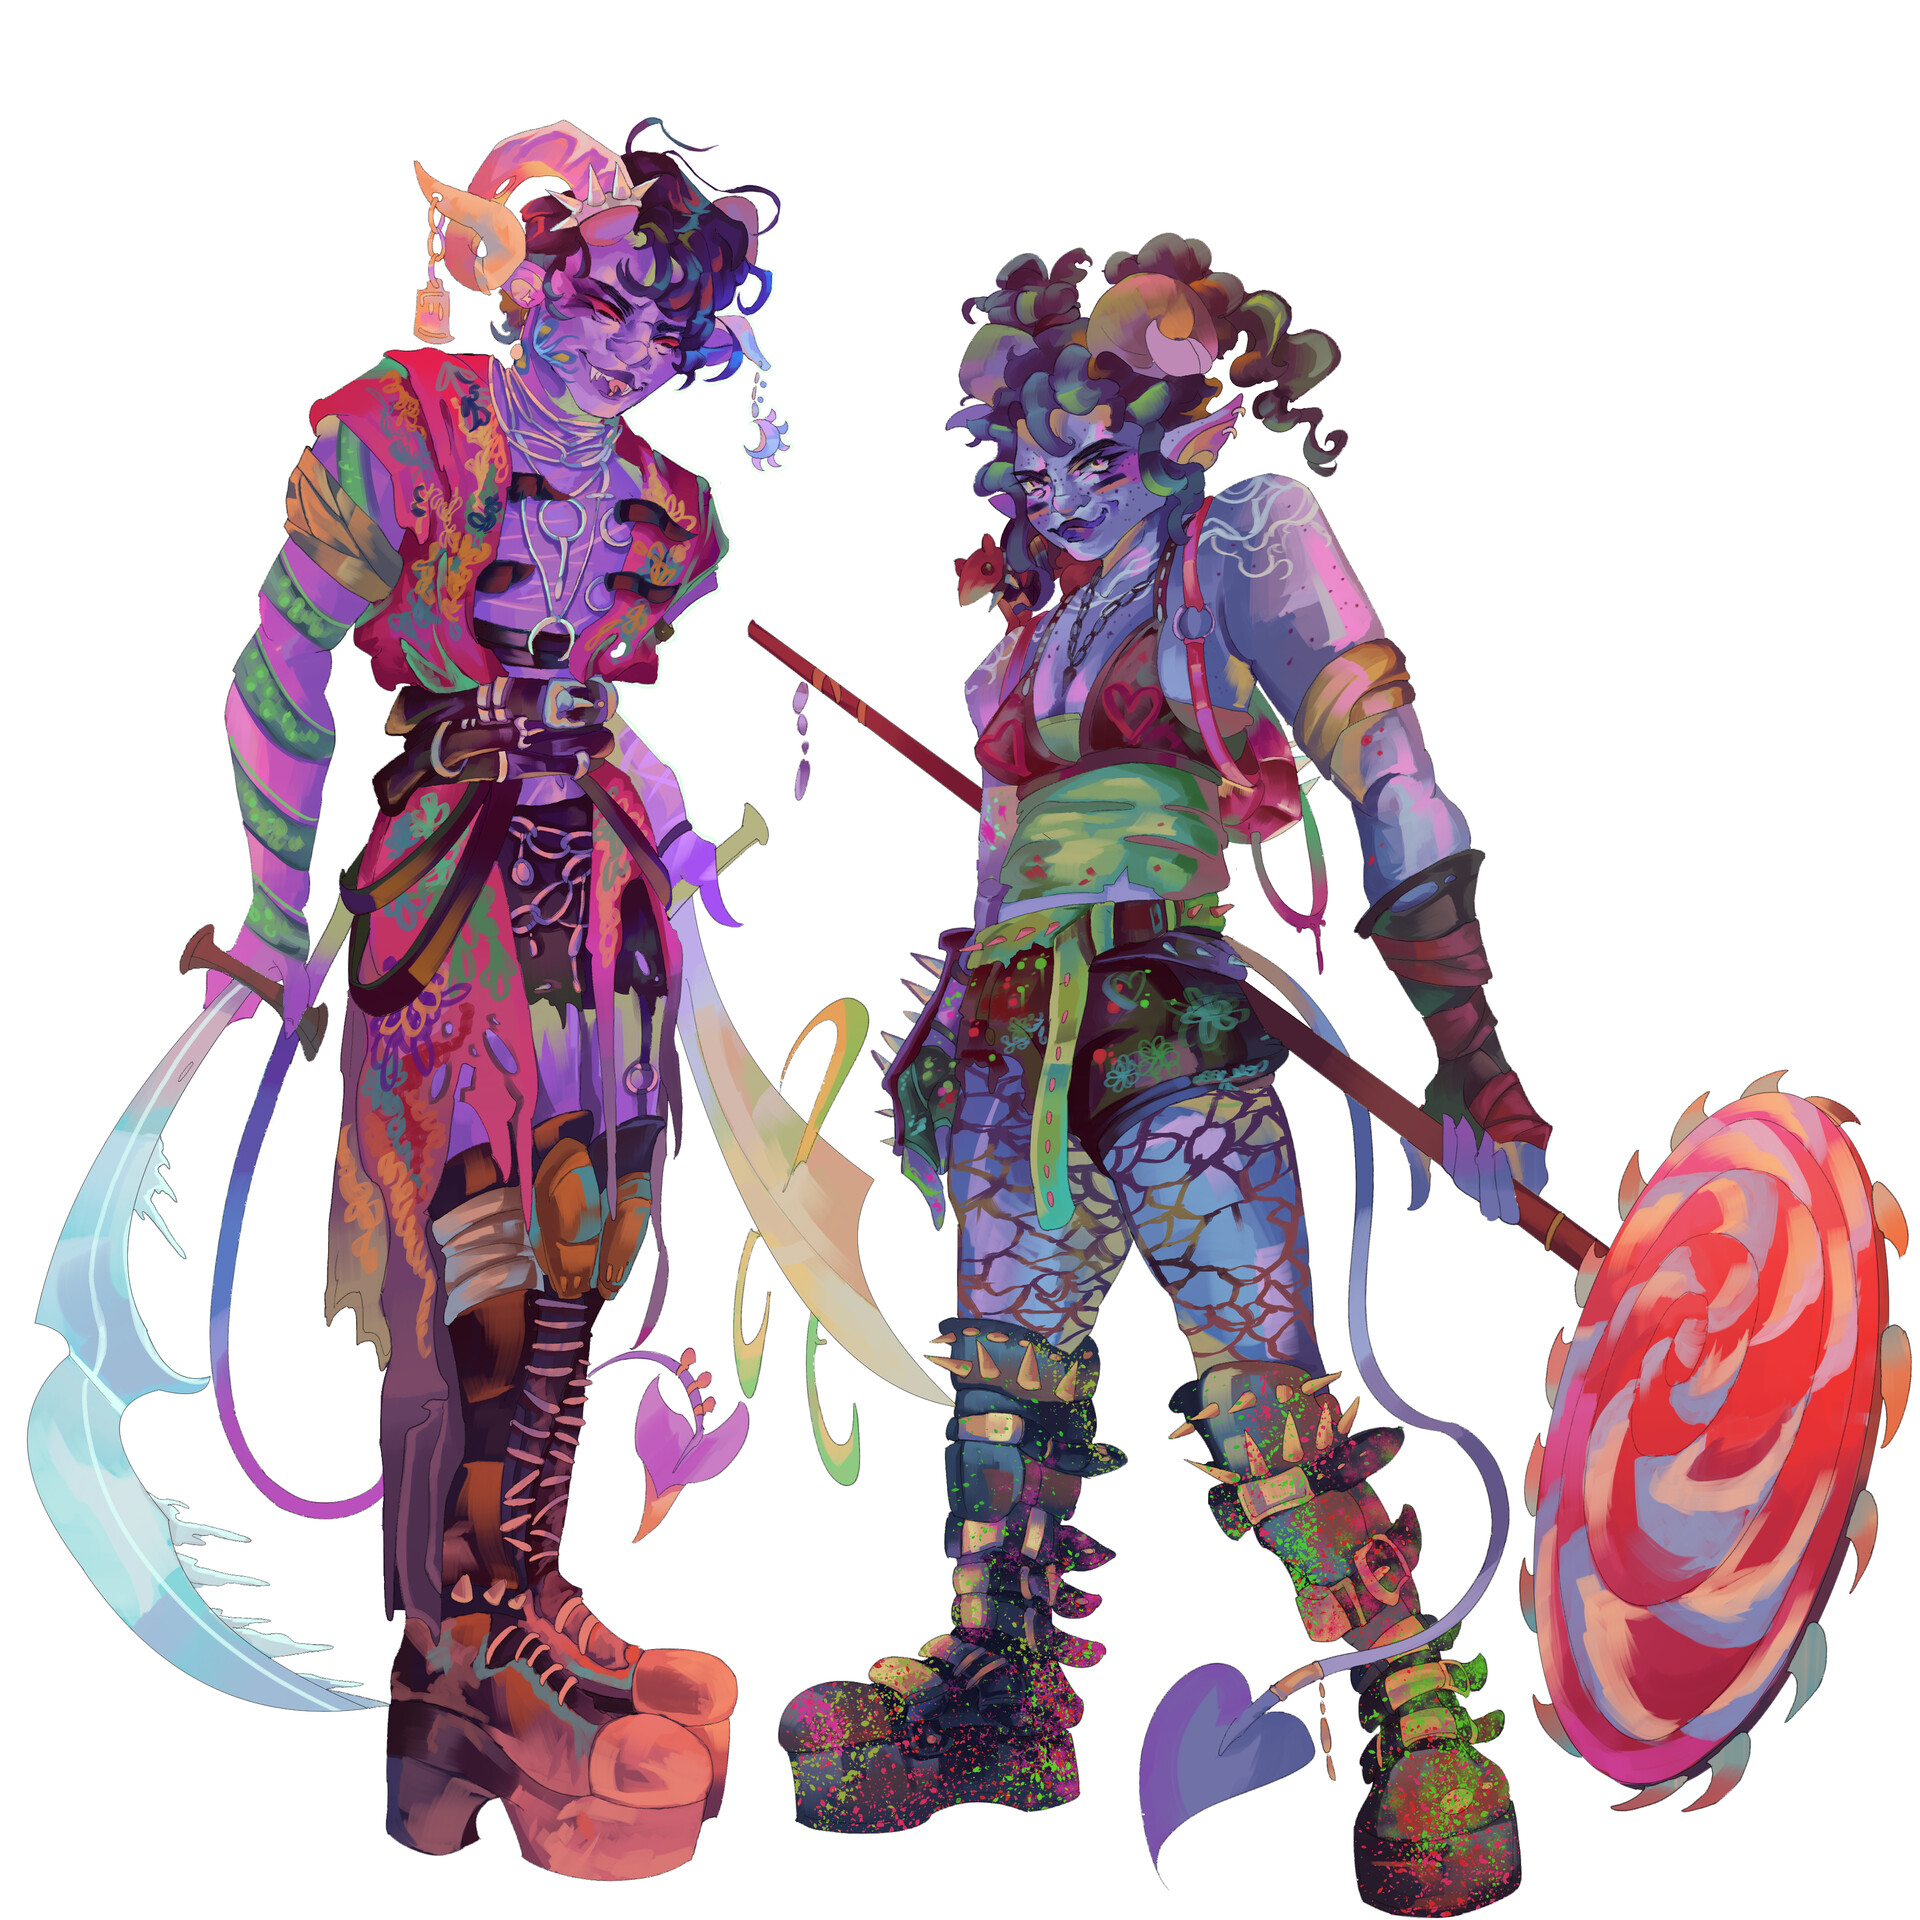 Fanart of Mollymauk Tealeaf and Jester Lavorre as they were depicted in the...